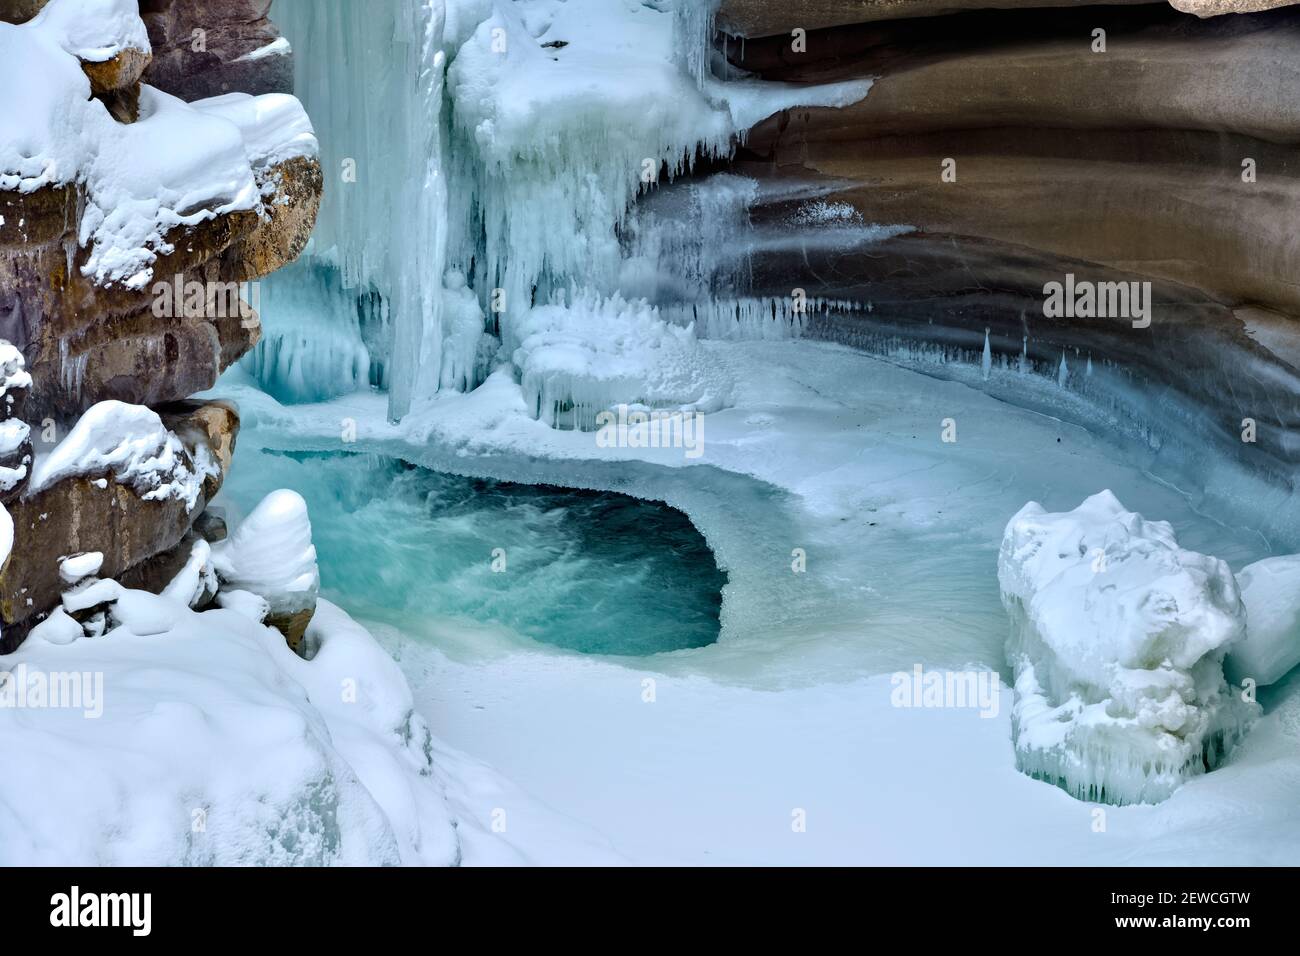 A horizontal image of The Athabasca falls in winter with frozen icicles clinging to the rock canyon walls in Jasper National Park in Alberta Canada. Stock Photo